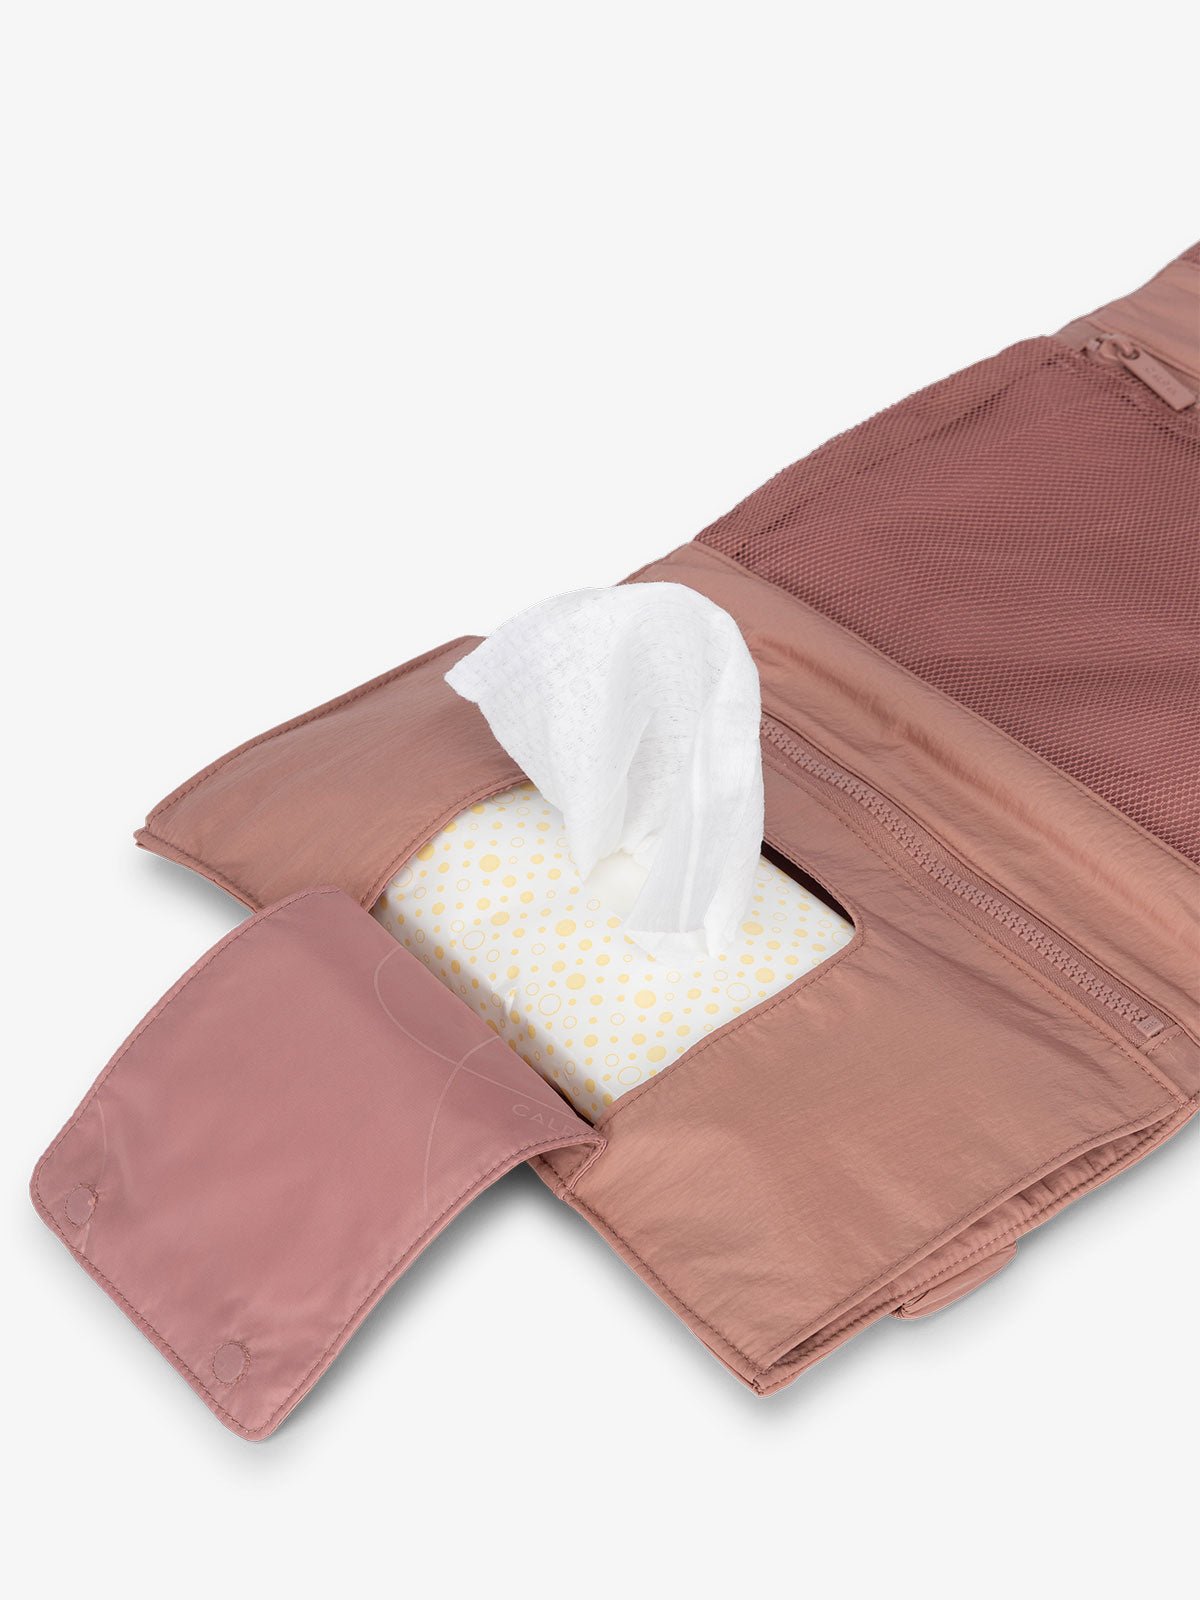 CALPAK portable changing pad clutch with dedicated baby wipe pocket in peony pink